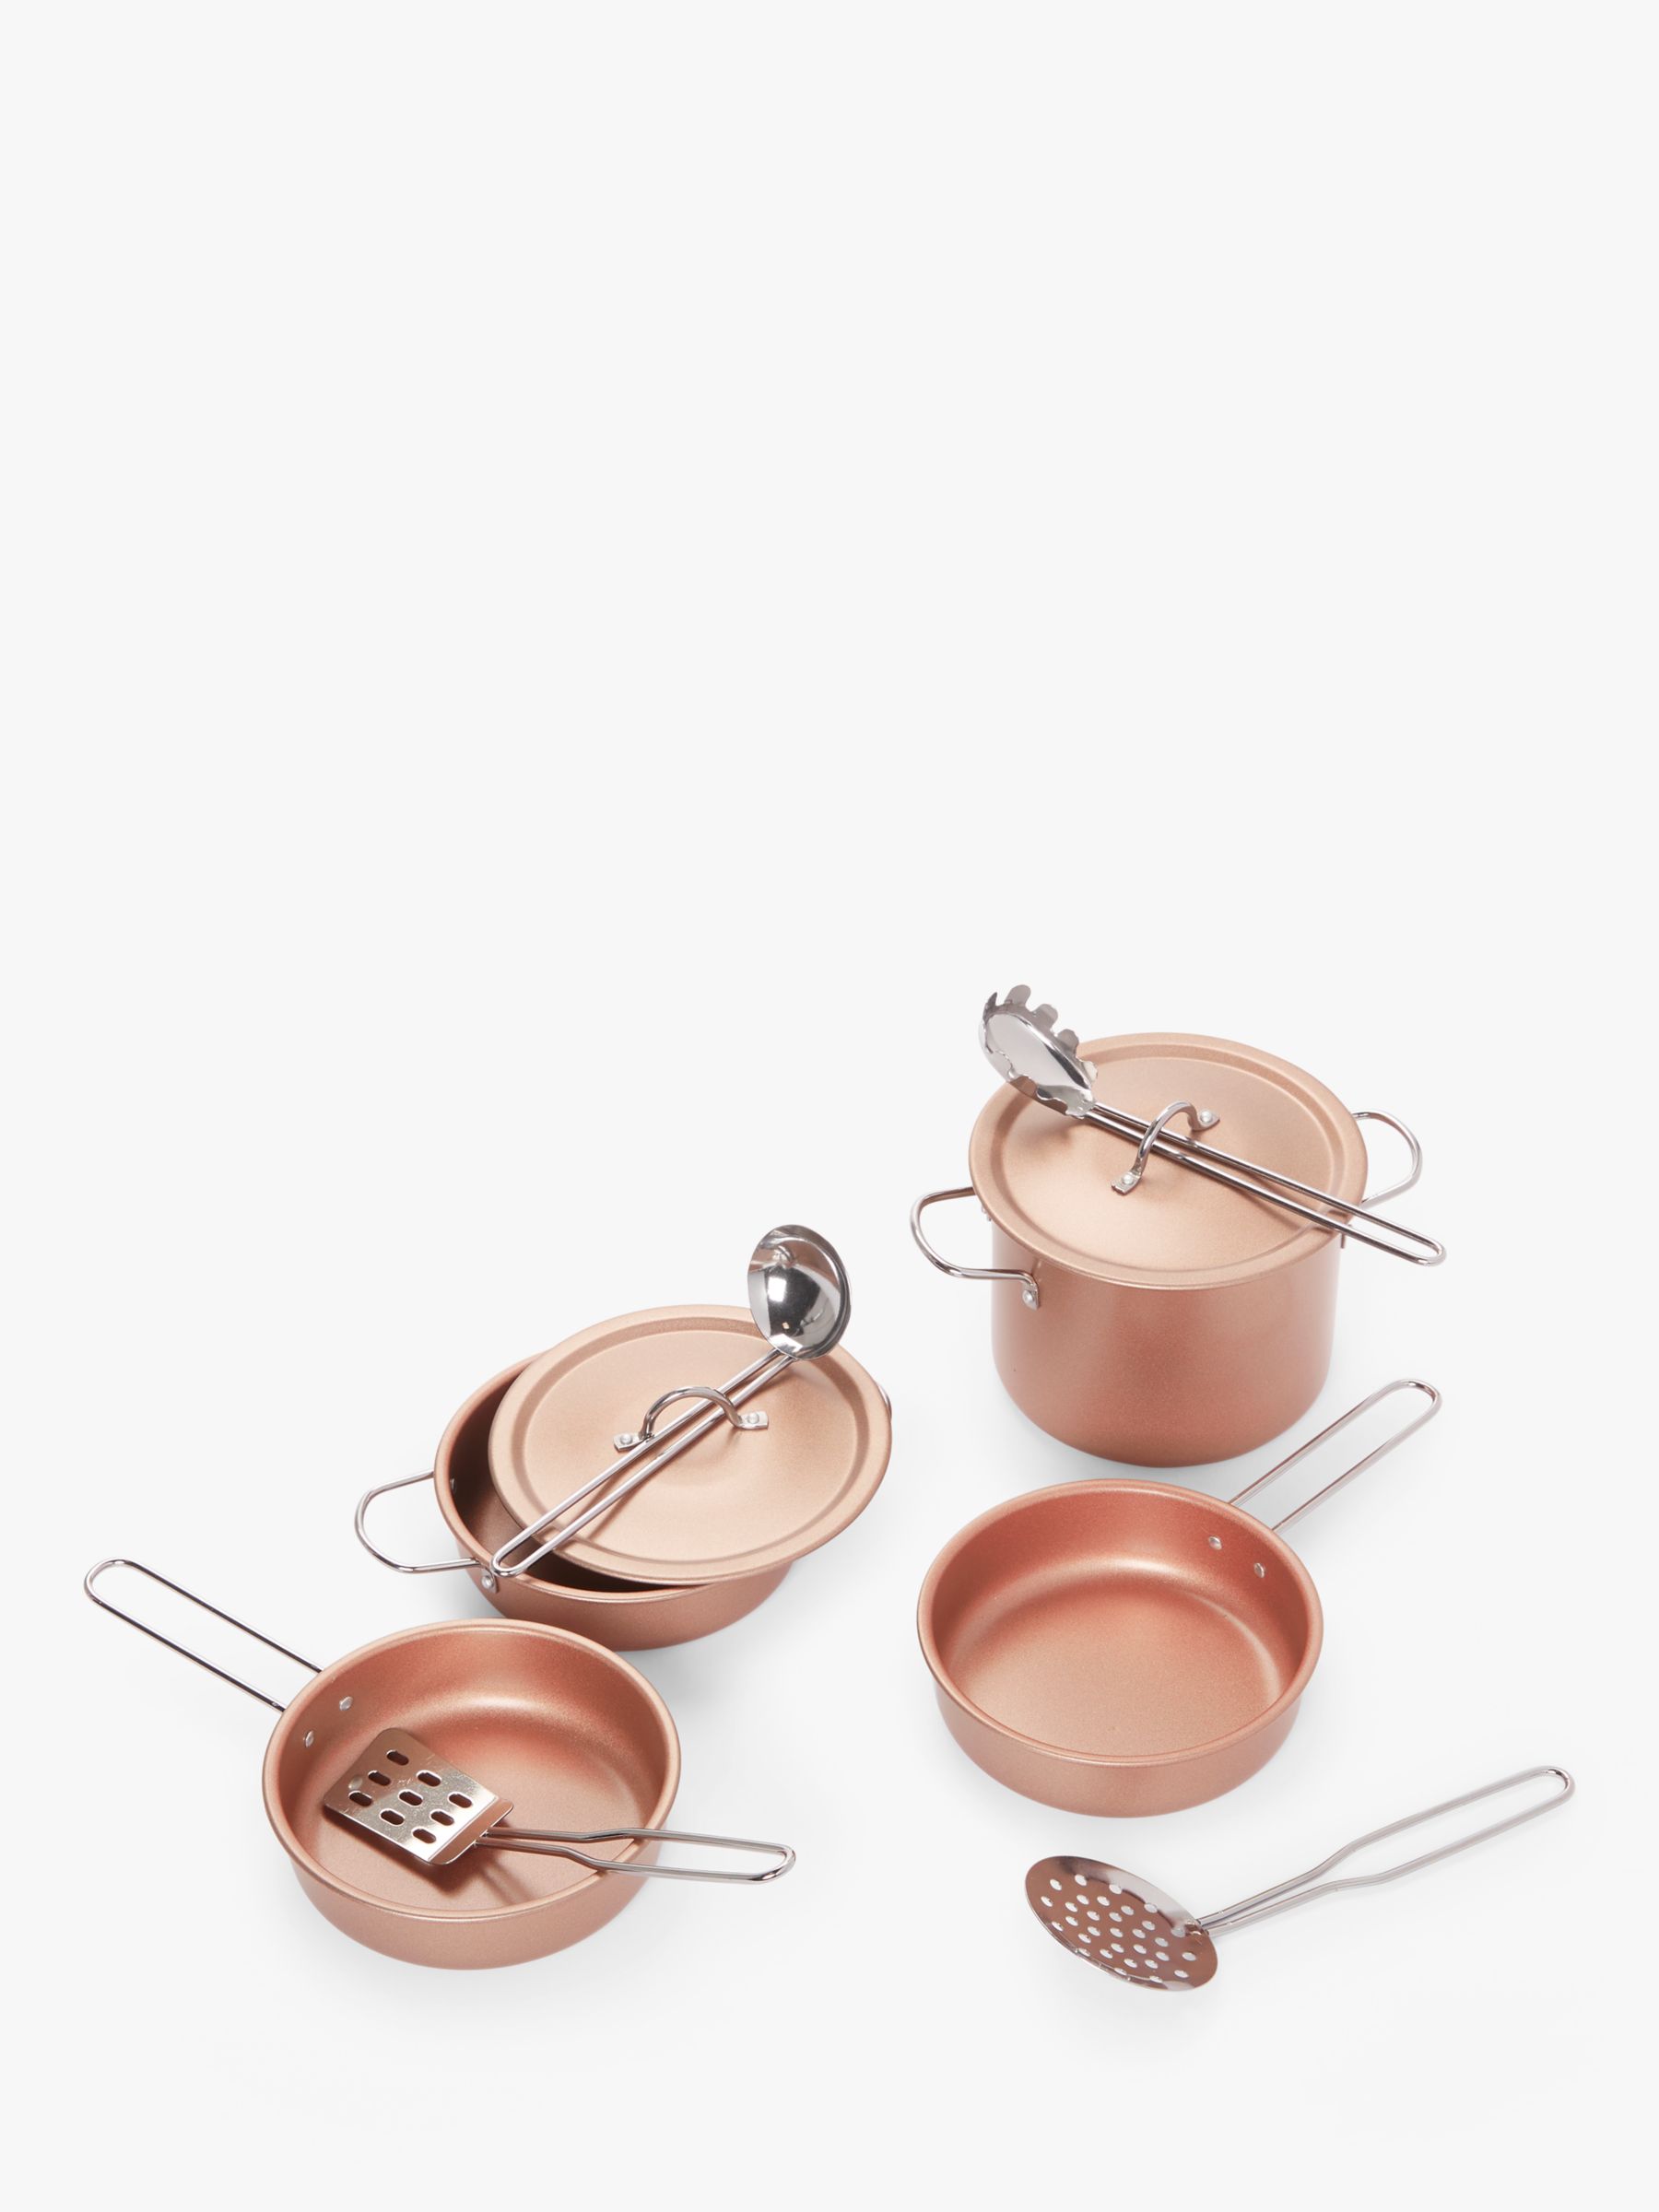 toy cookware